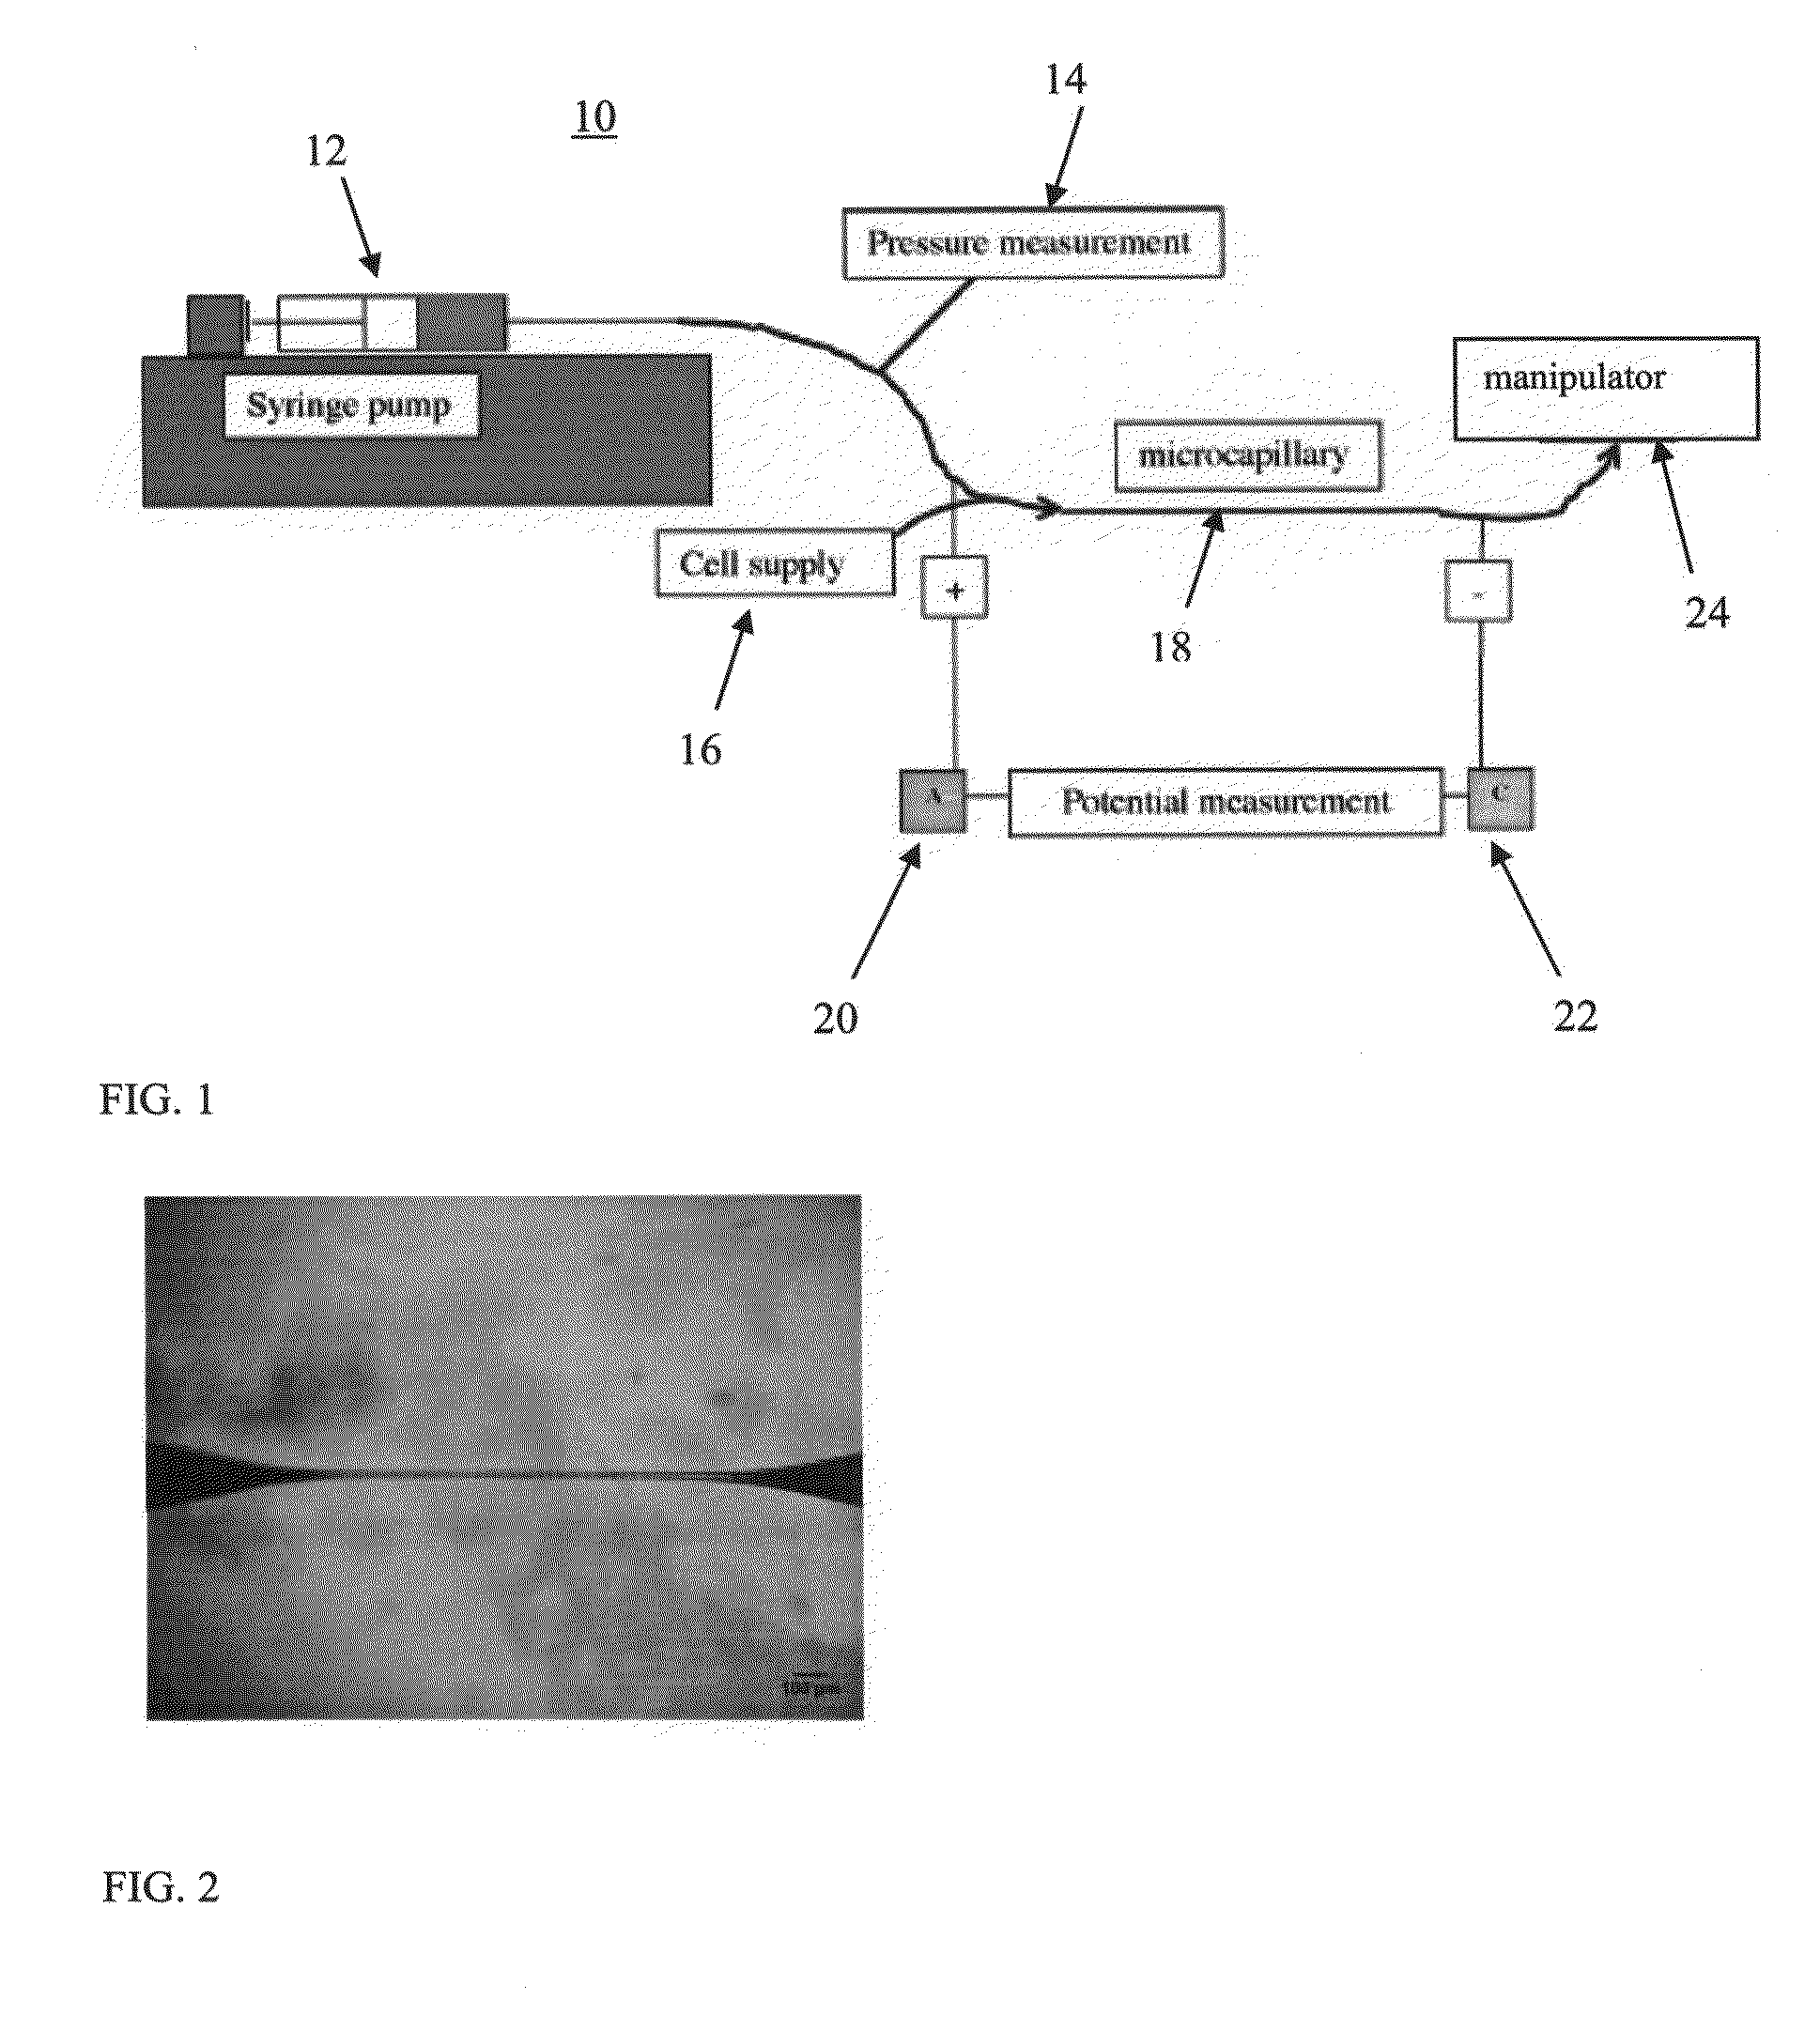 Systems and methods for analyzing and manipulating biological samples